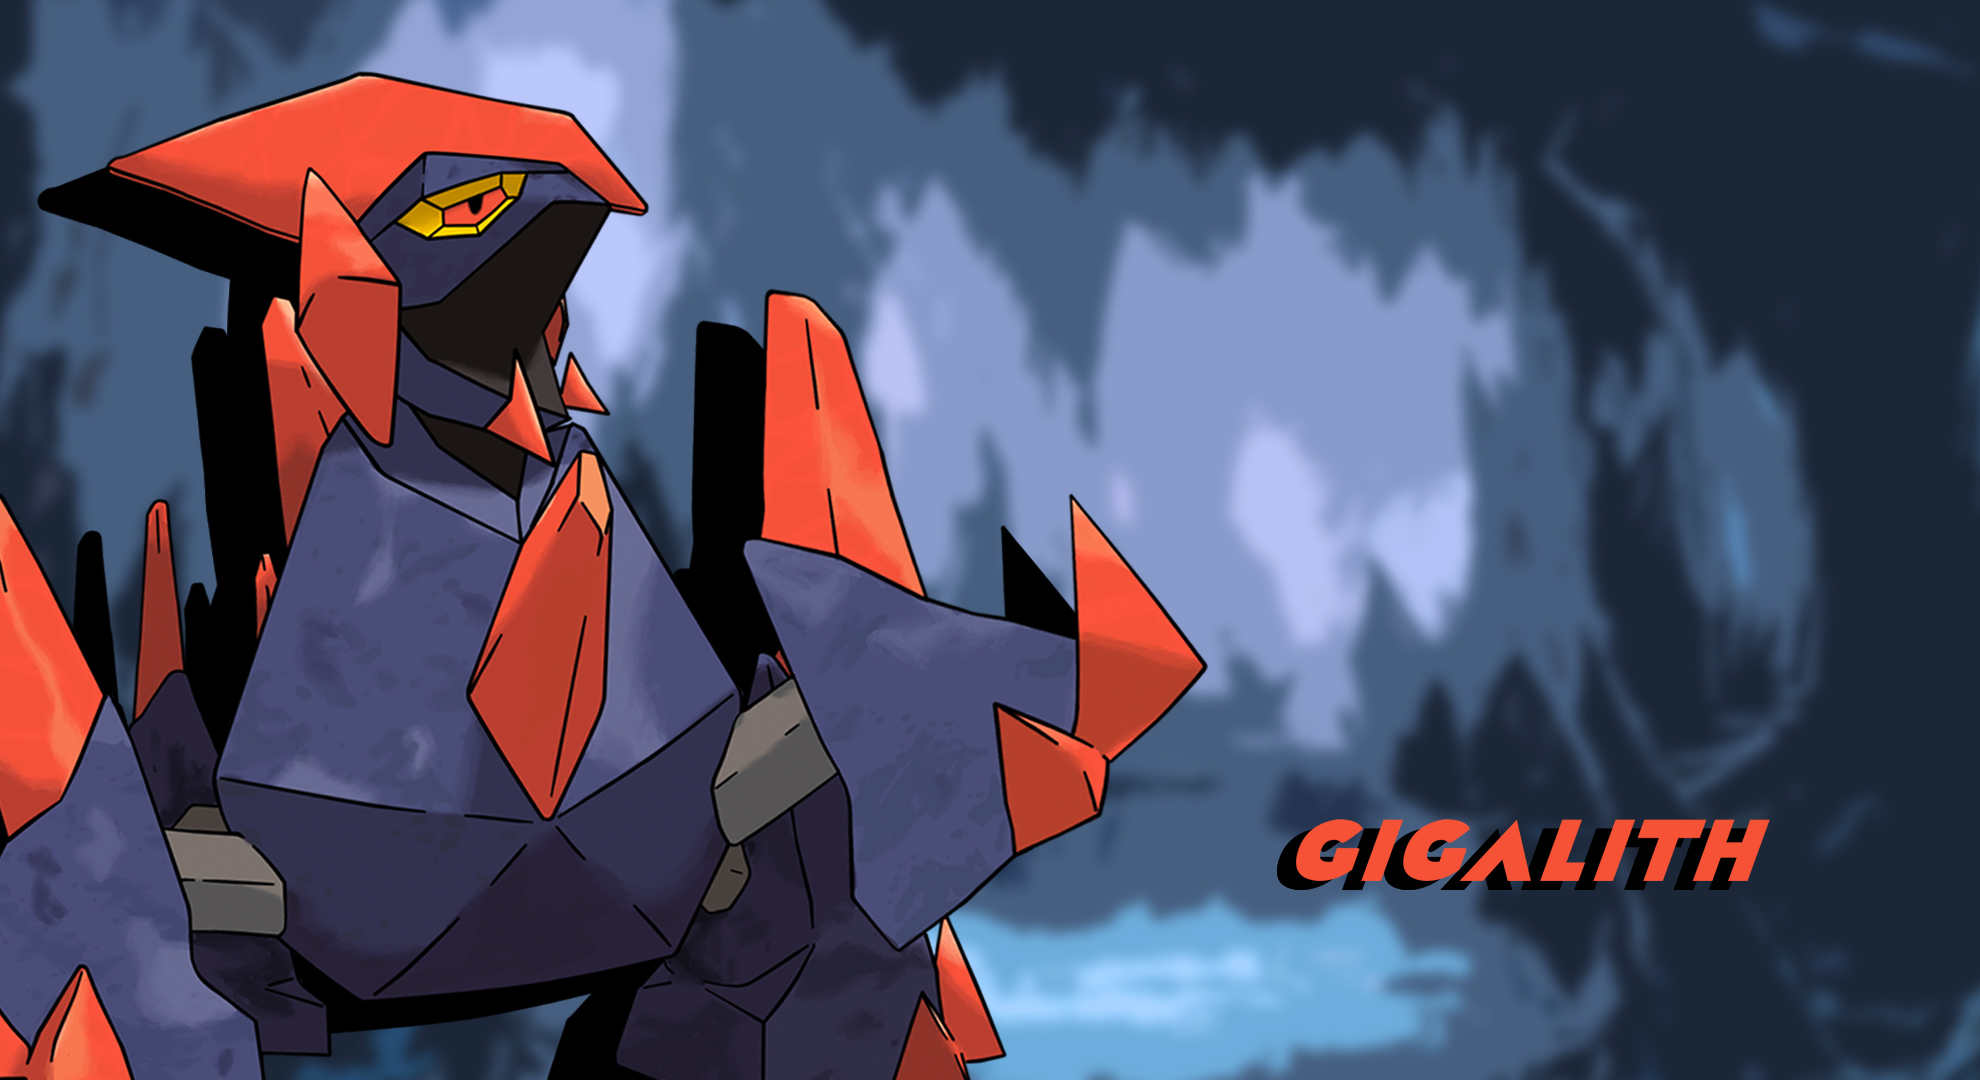 Gigalith Hd Wallpapers